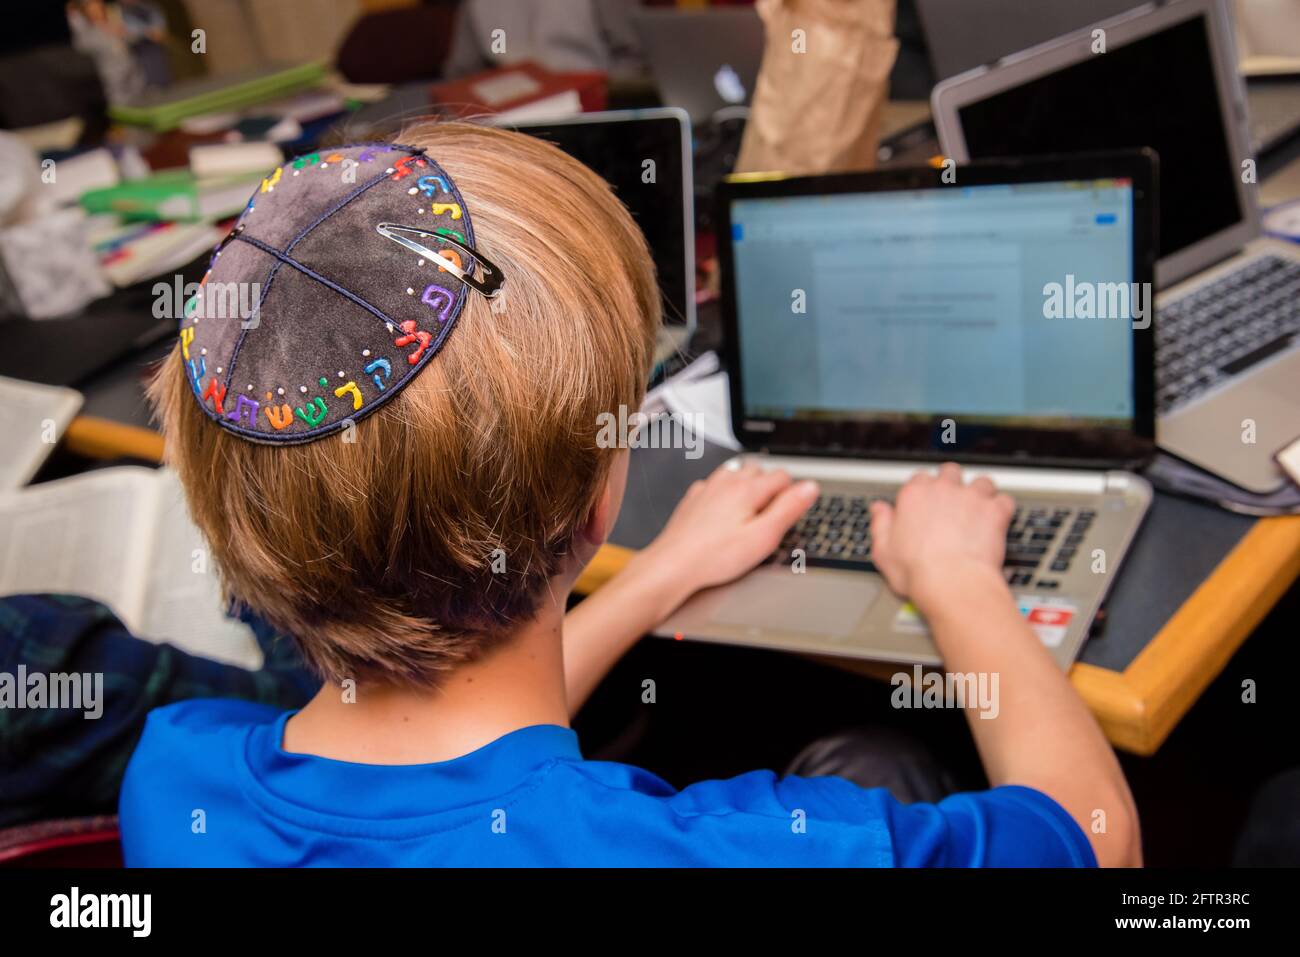 young-jewish-boy-wearing-yarmulke-from-the-back-typing-on-a-keyboard-at-school-2FTR3RC.jpg